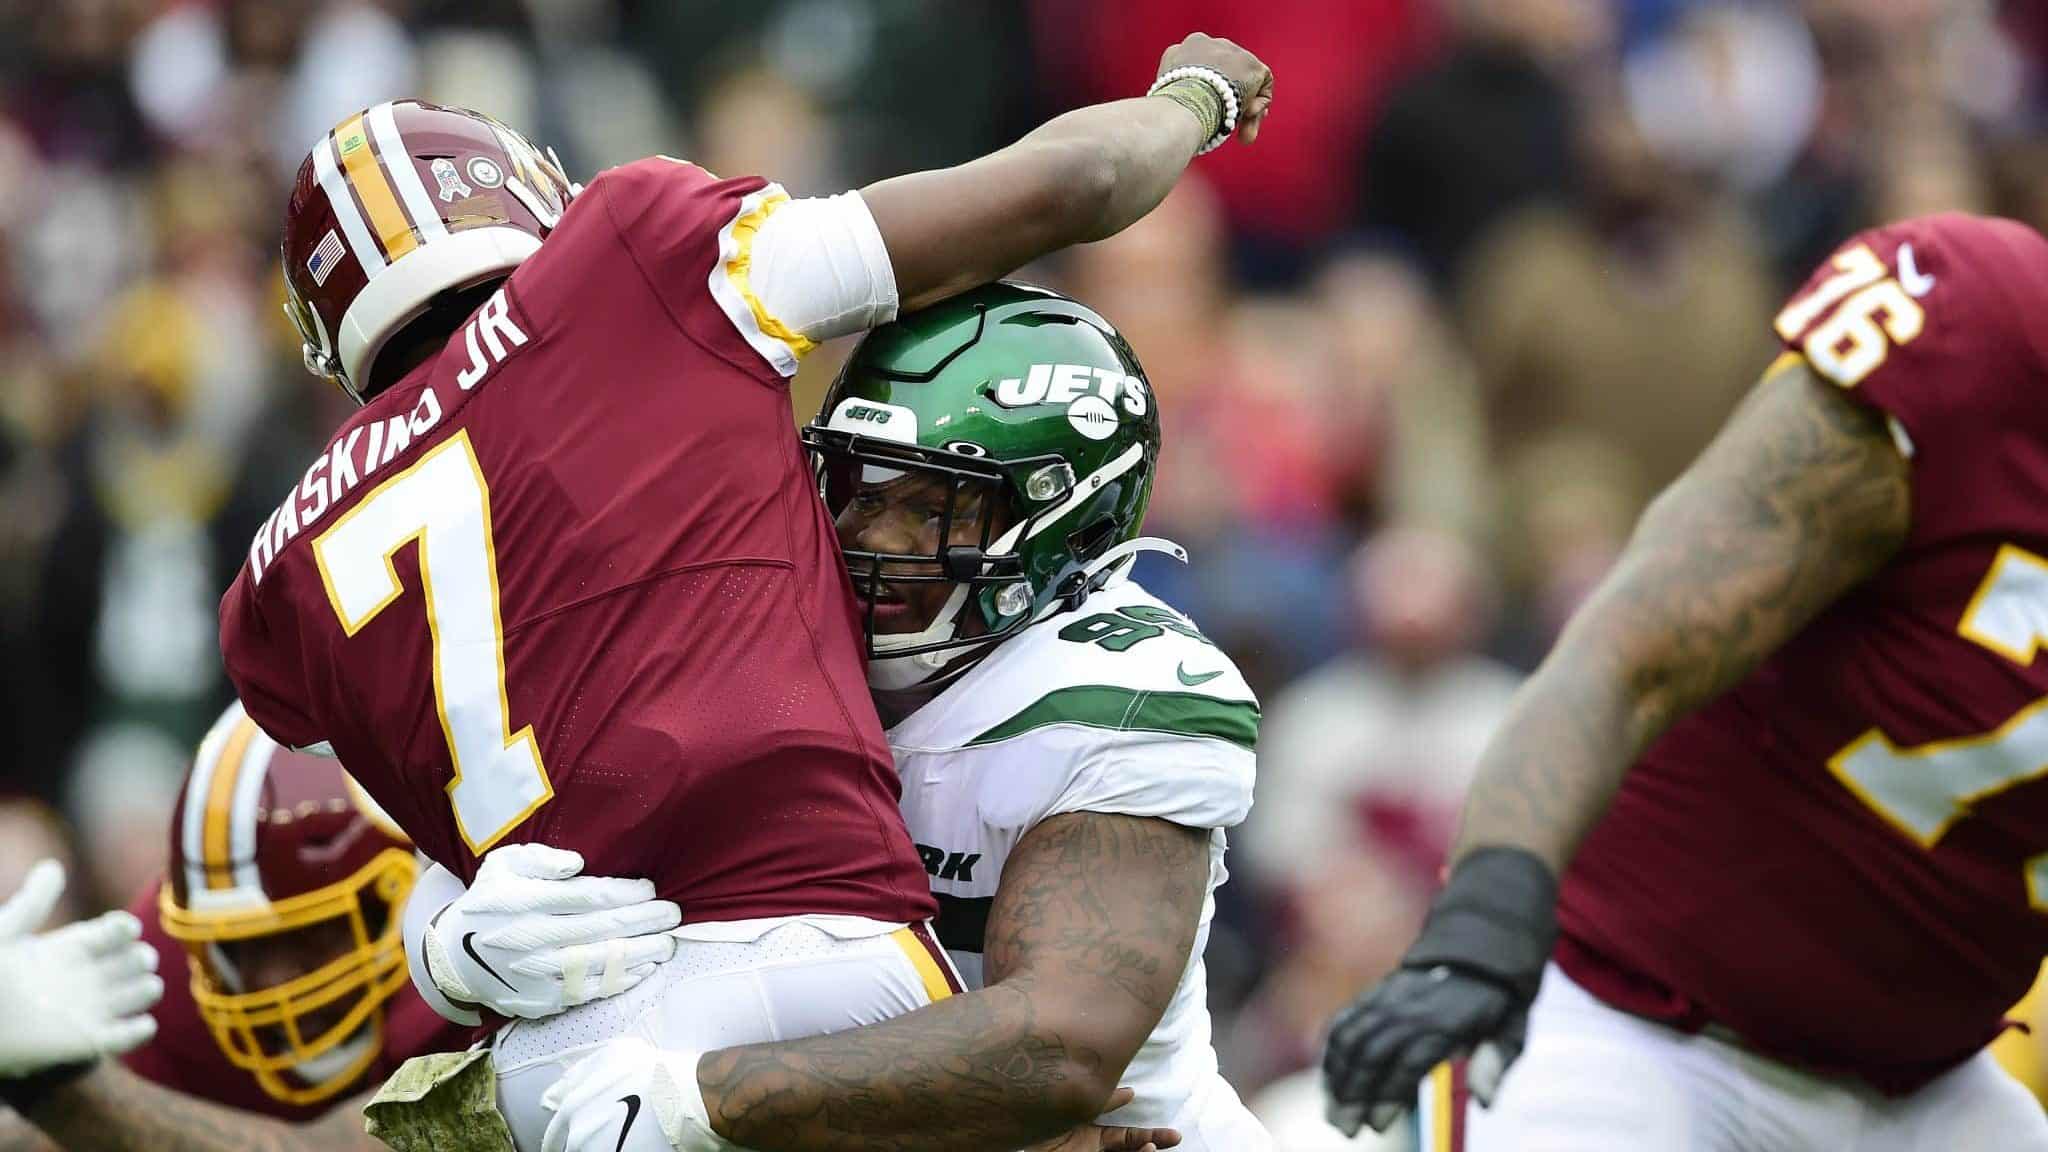 LANDOVER, MD - NOVEMBER 17: Dwayne Haskins #7 of the Washington Redskins is tackled by Quinnen Williams #95 of the New York Jets after throwing a pass in the first quarter at FedExField on November 17, 2019 in Landover, Maryland.